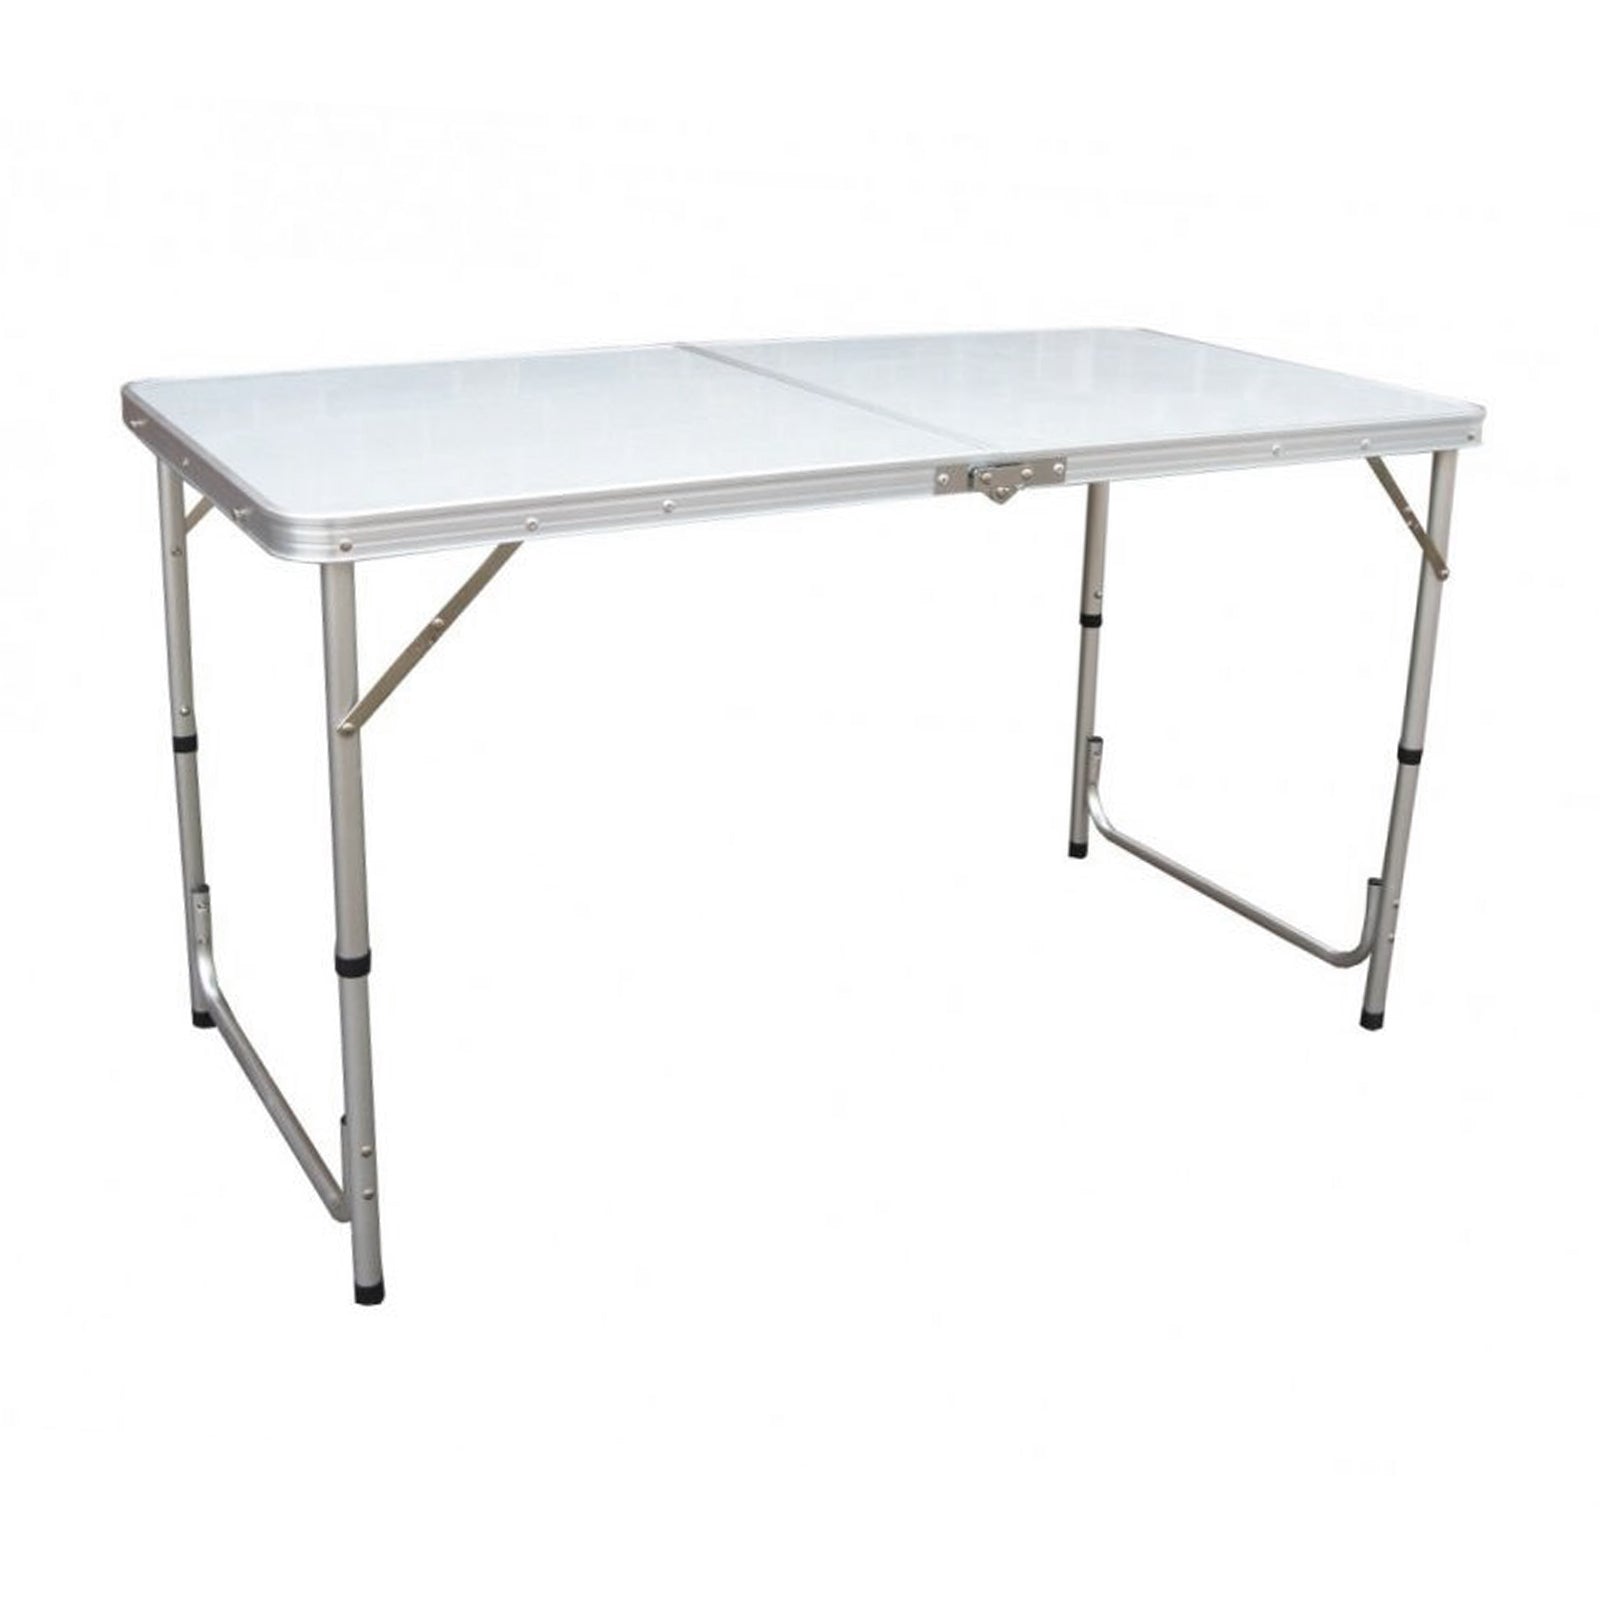 Summit Double Folding Table for Camping Barbecue and Picnic